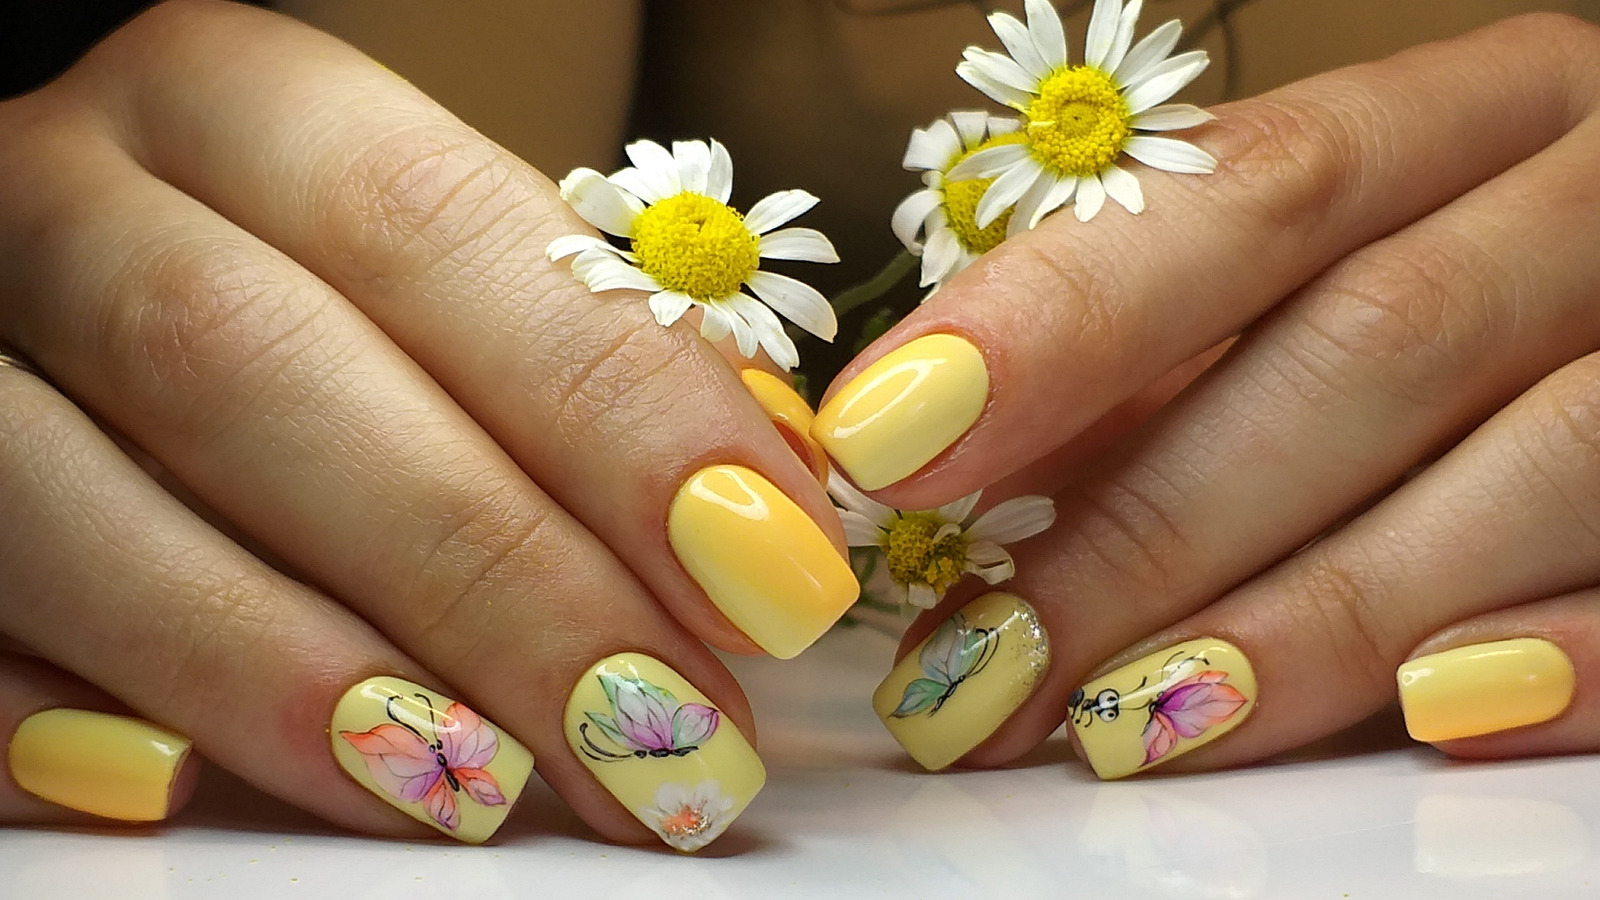 Nail Art Trend - Butterfly Nails - Holy Nails Pune